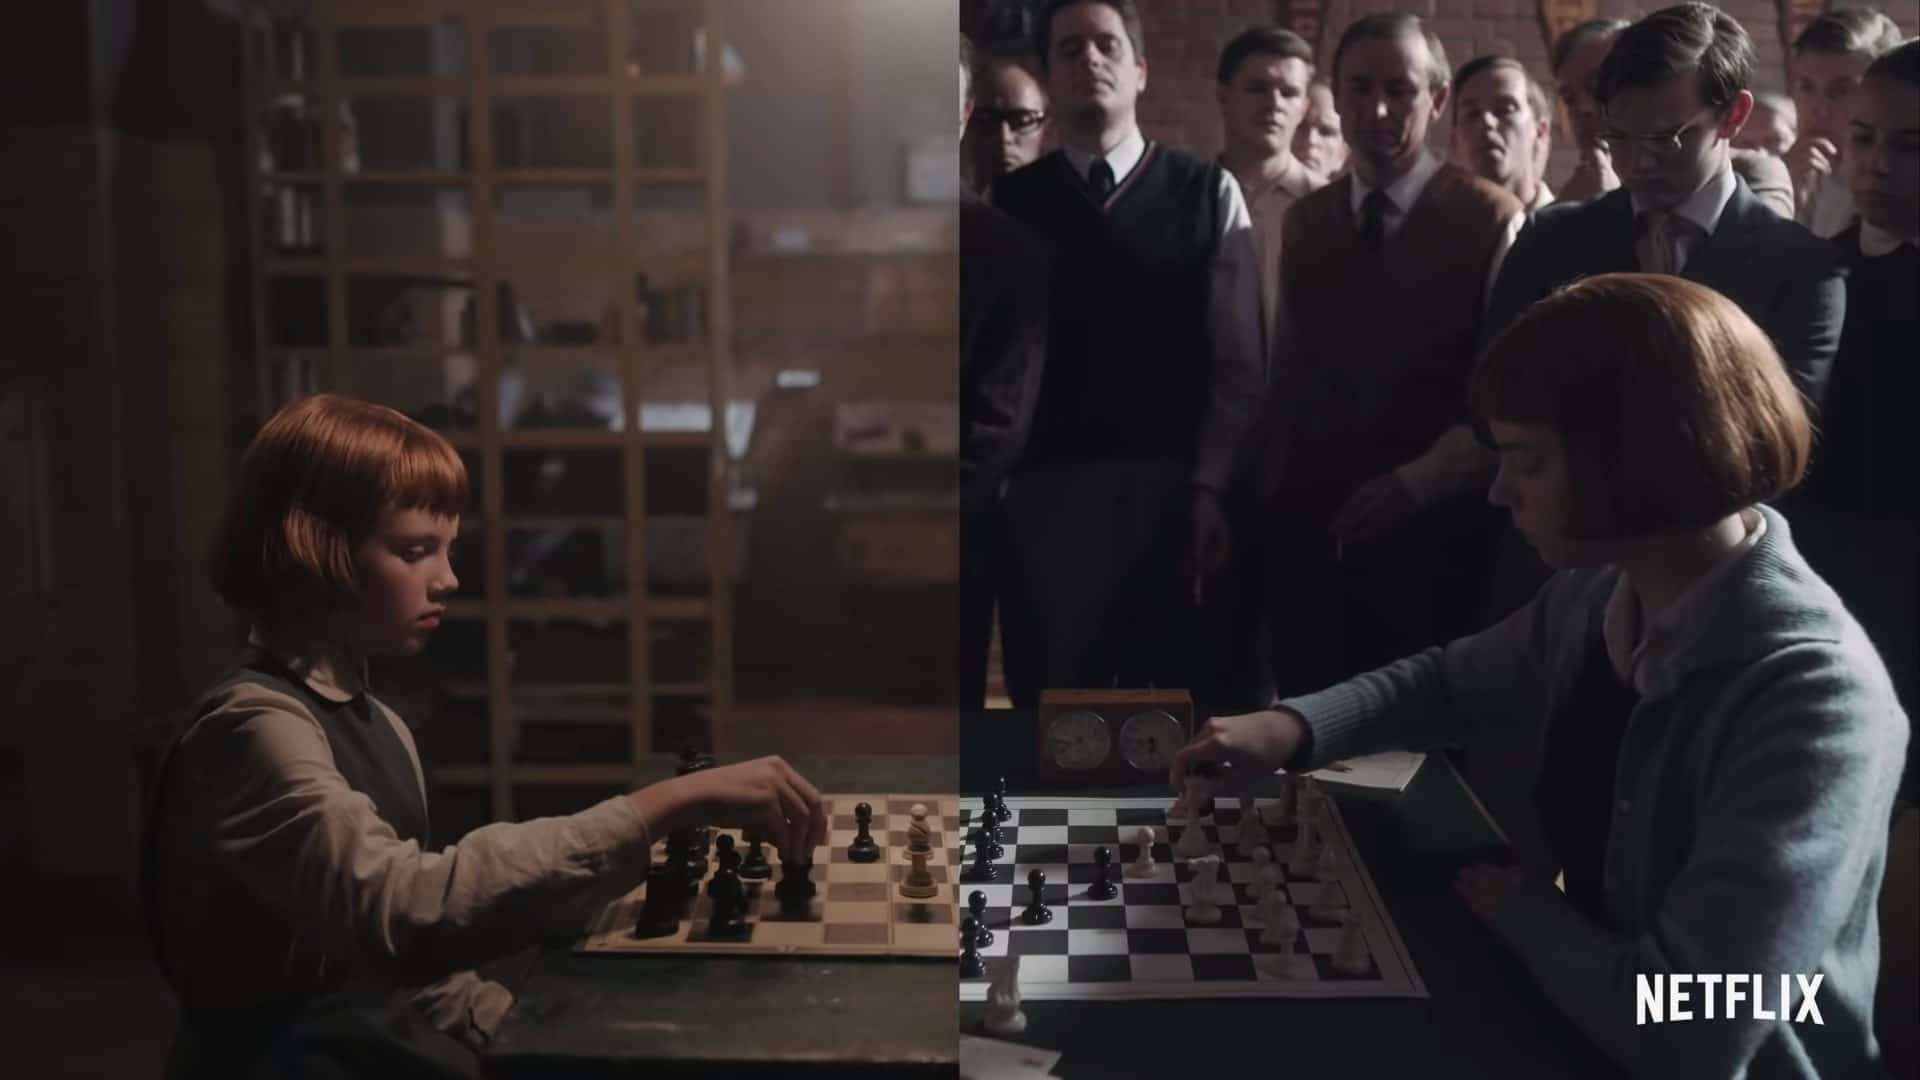 The Beauty And Complexity Of The Game Of Chess-inspired Netflix Show, The Queen's Gambit Background